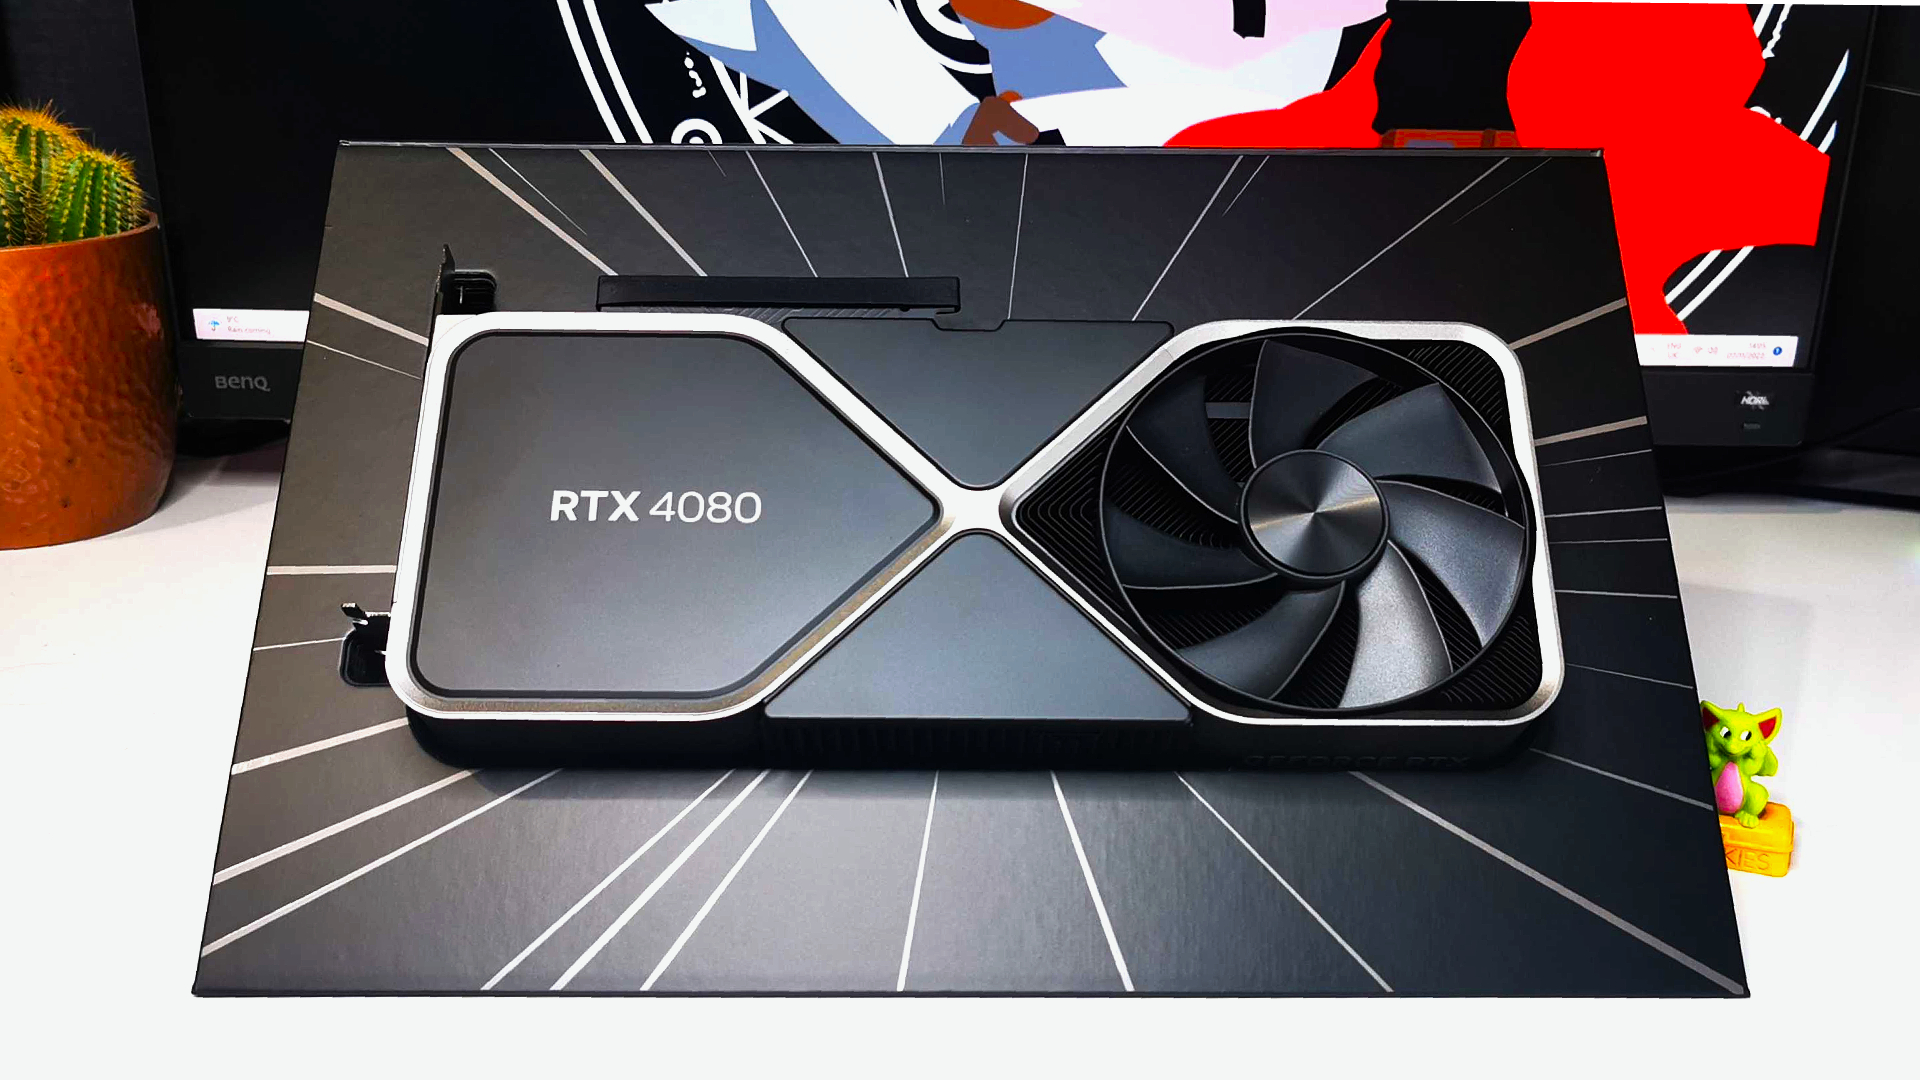 Nvidia RTX 4080 graphics card sitting in GeForce packaging on white desk